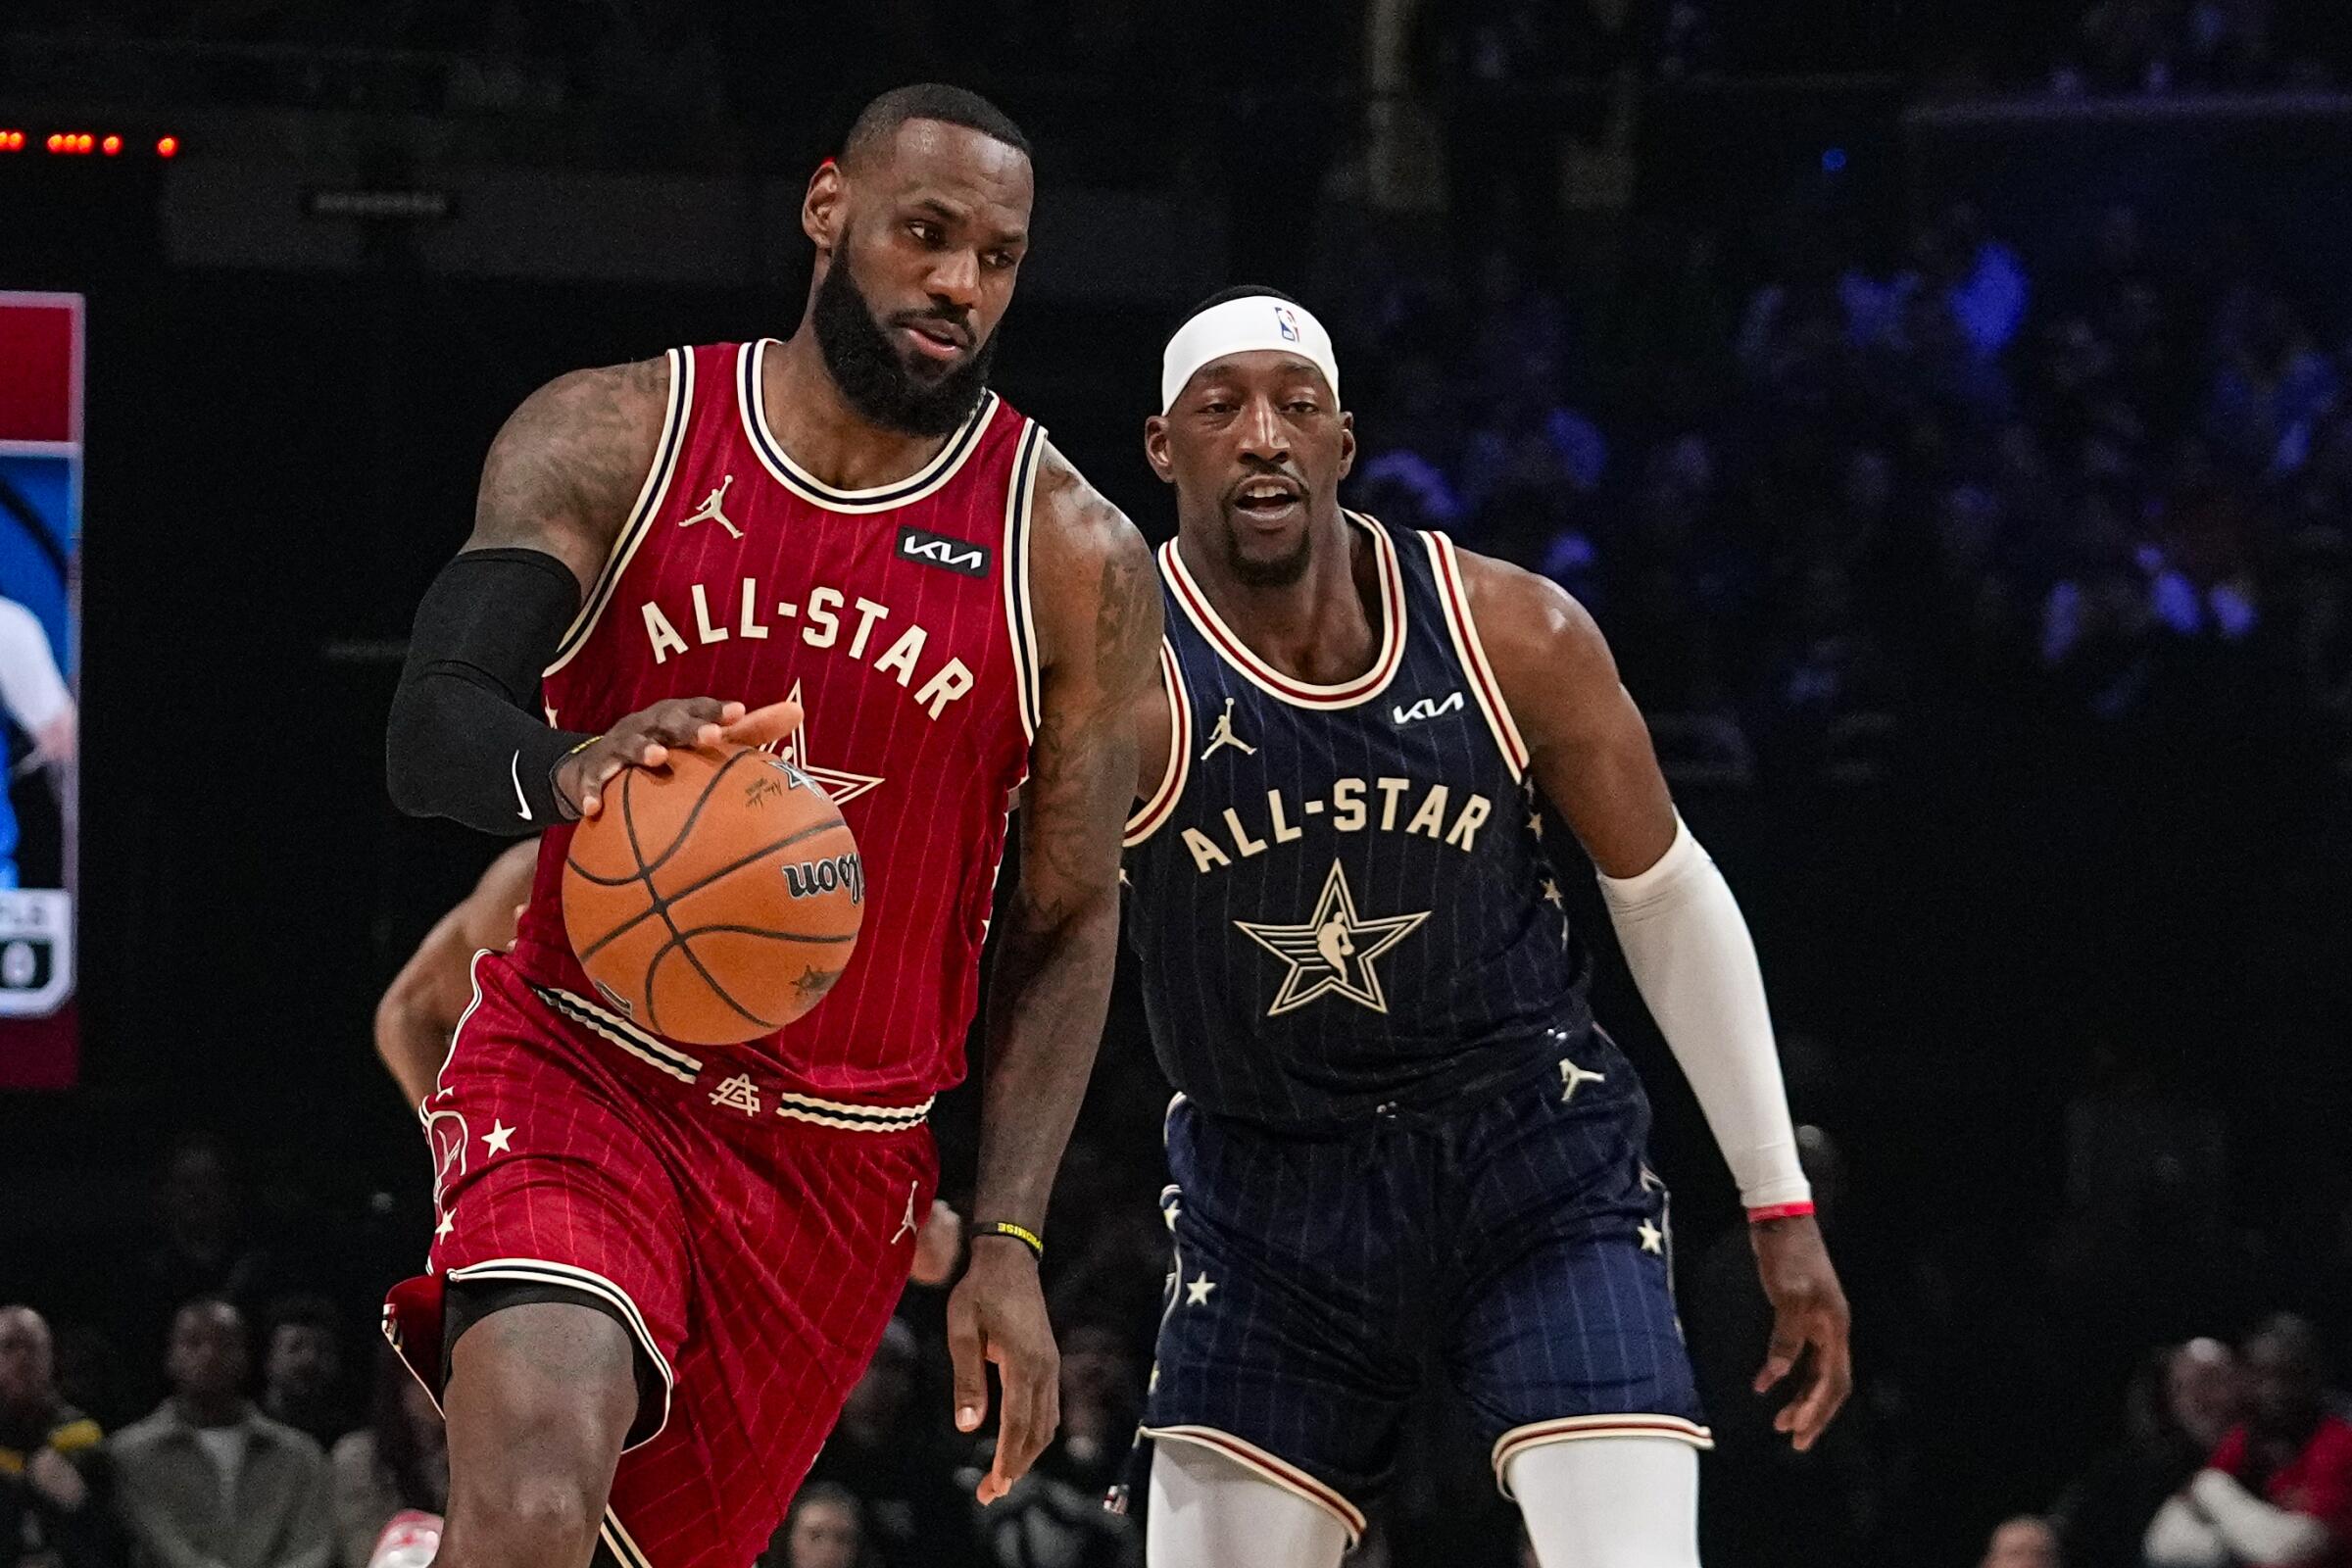 Lakers star LeBron James, left, drives past Miami Heat center Bam Adebayo during the first half of the NBA All-Star Game.